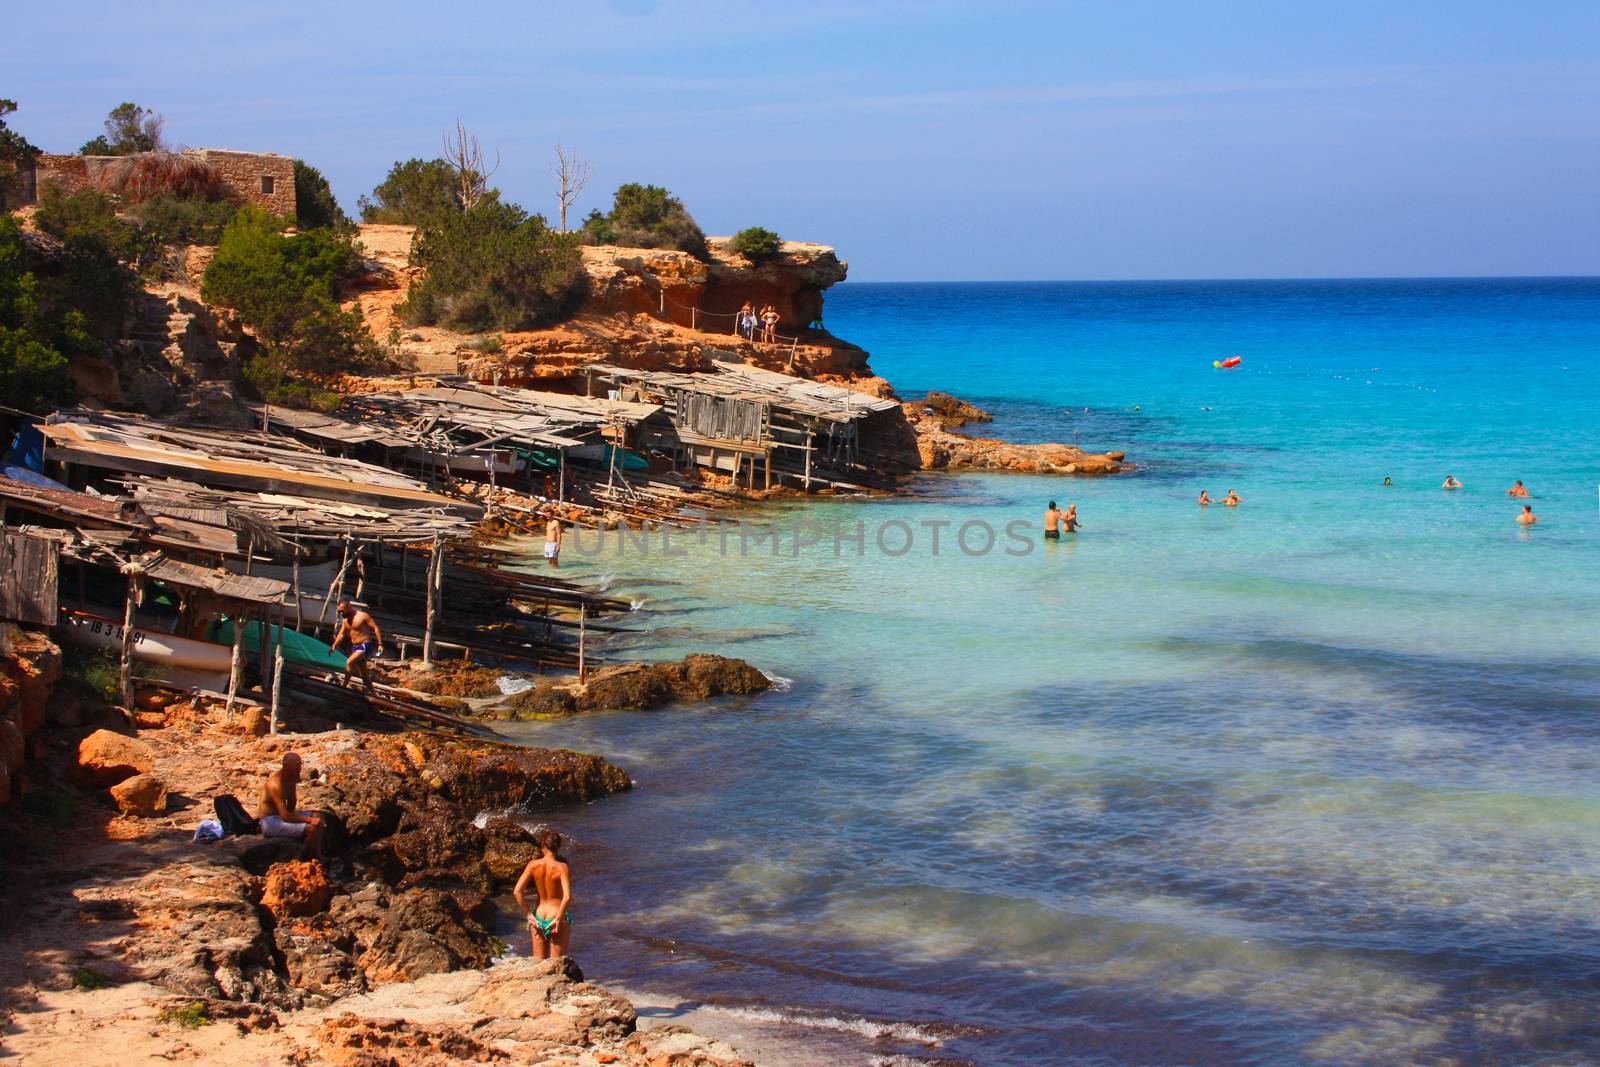 Cala Saona that is one of the most beautiful beaches of Ibiza with its crystal clear water in spain